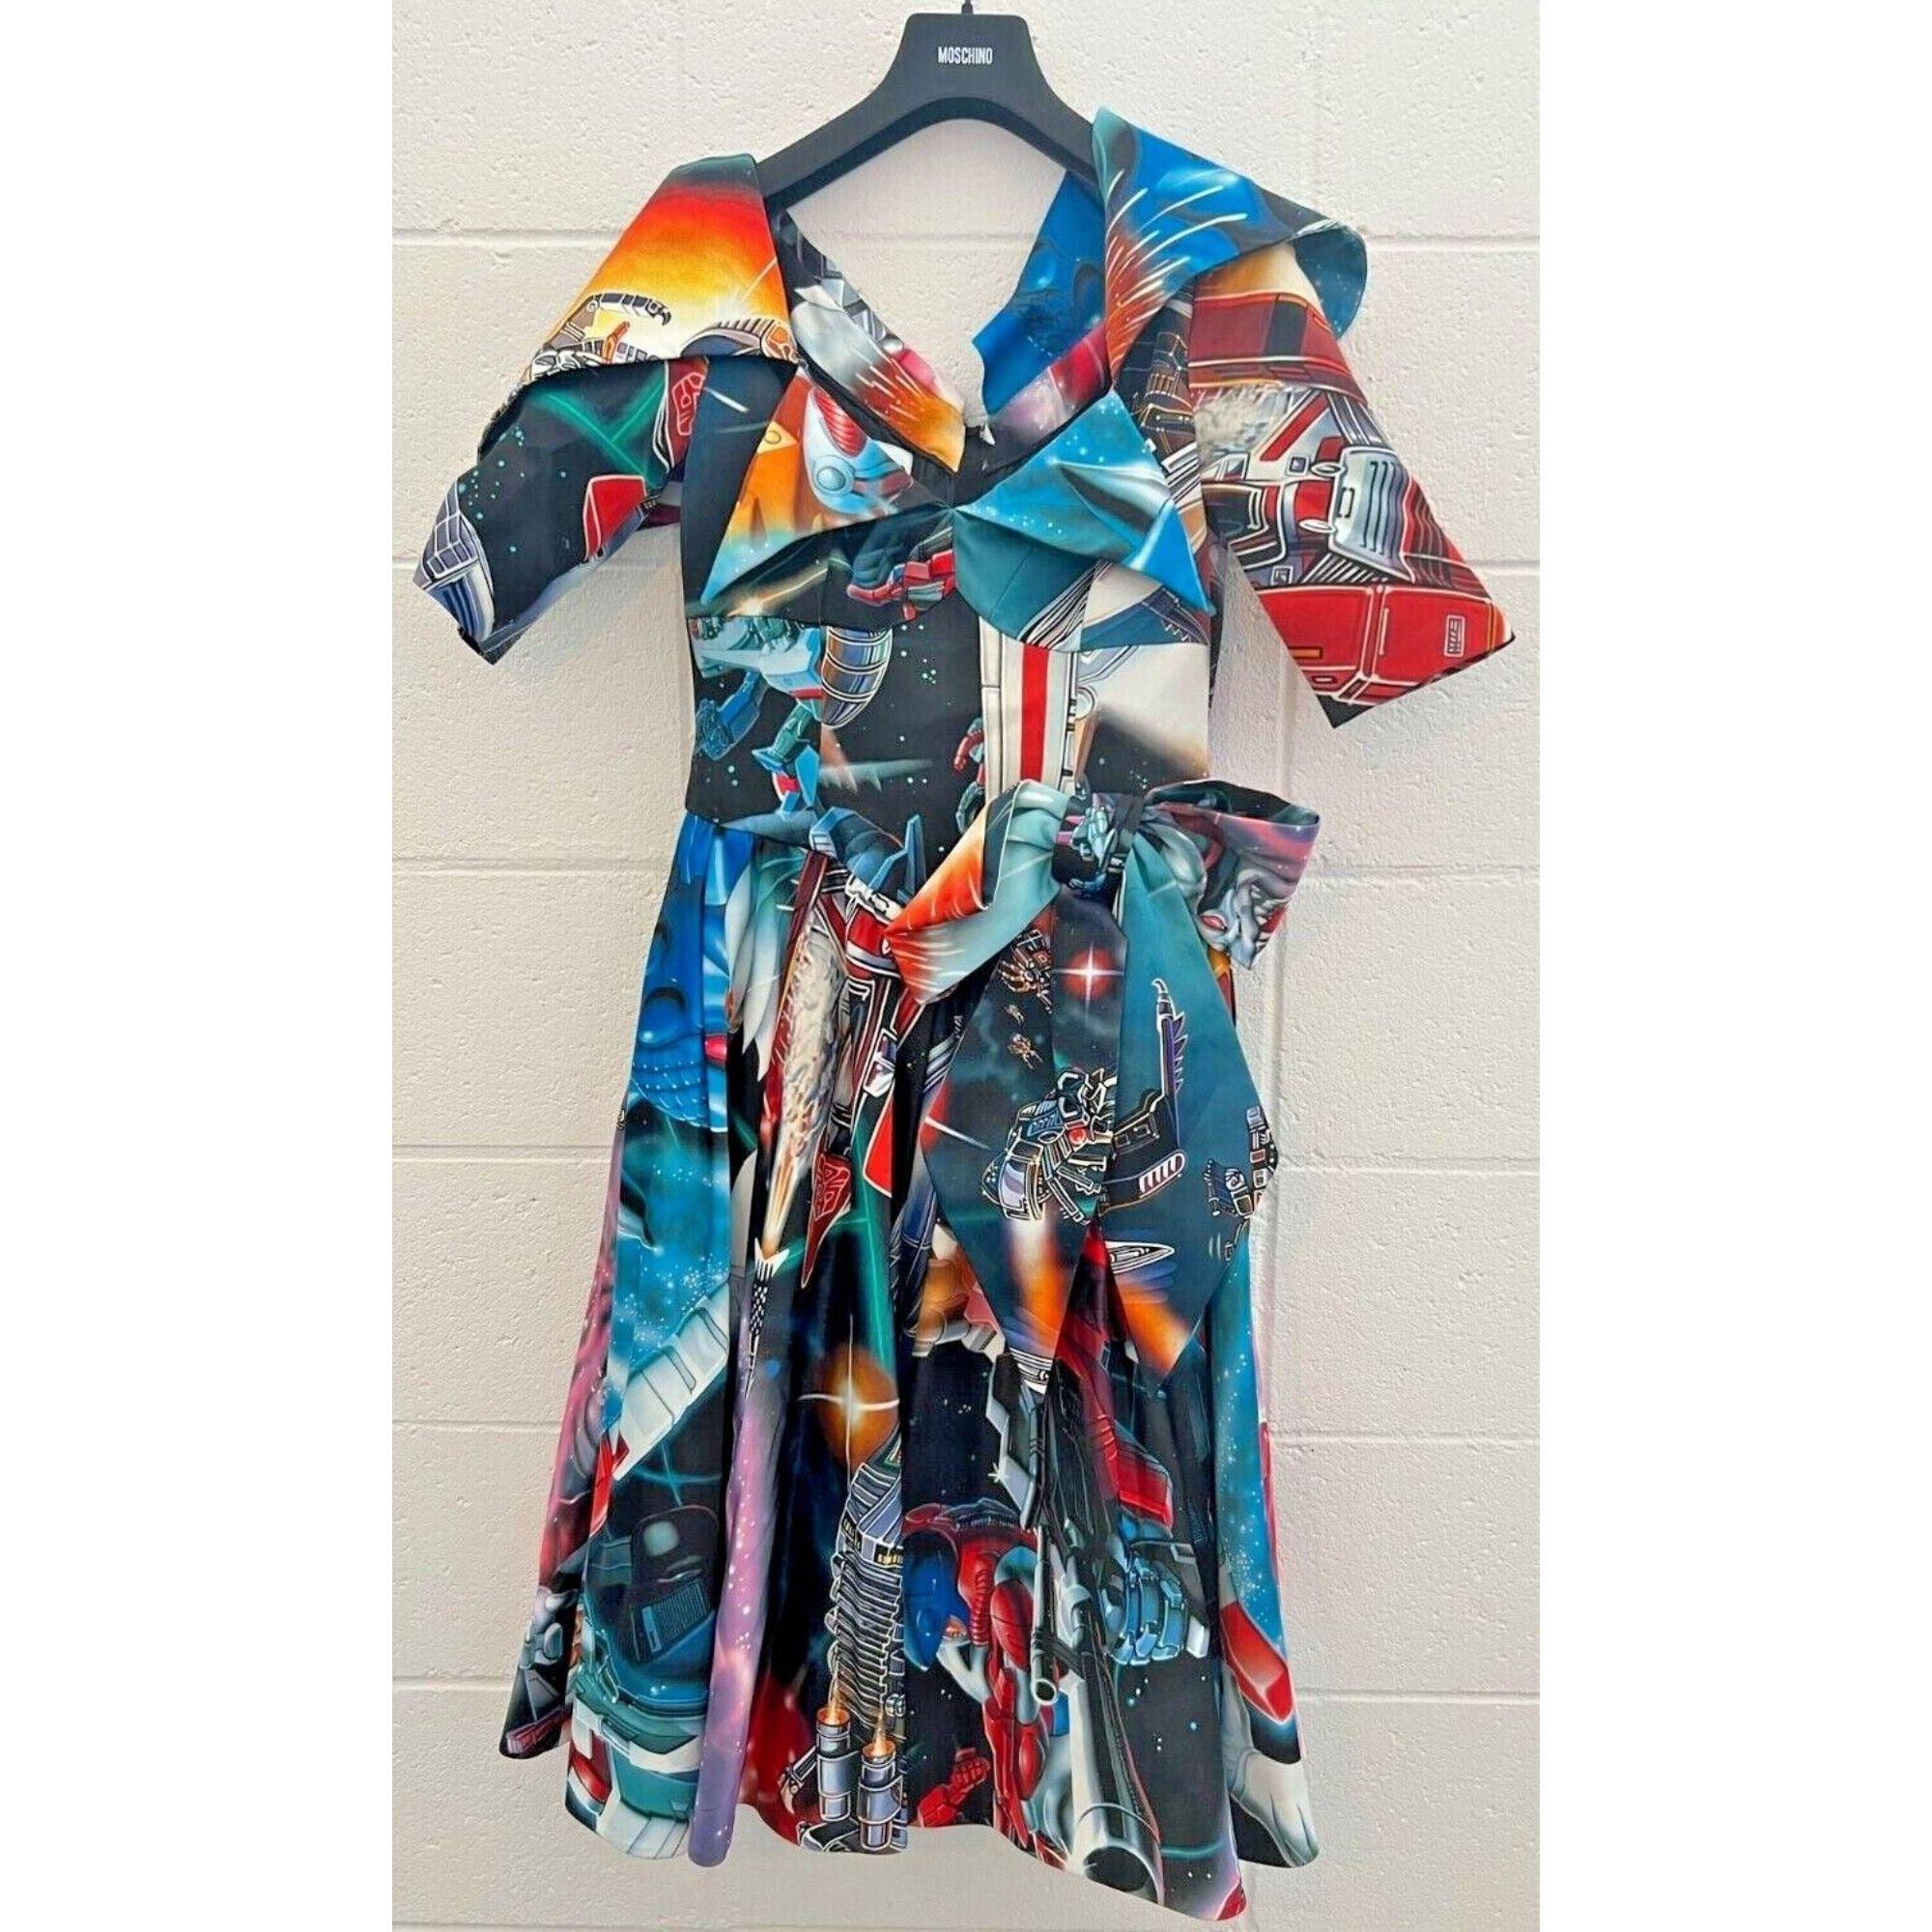 AW17 Moschino Couture Jeremy Scott Transformers Dress Cocktail Gown AllOverPrint

Additional Information:
Material: 100% Polymide
Color: Multicolor
Size: IT 42 / US 8
Style: Cocktail Gown
Pattern: Abstract, Transformers
Dimensions: Bust 15